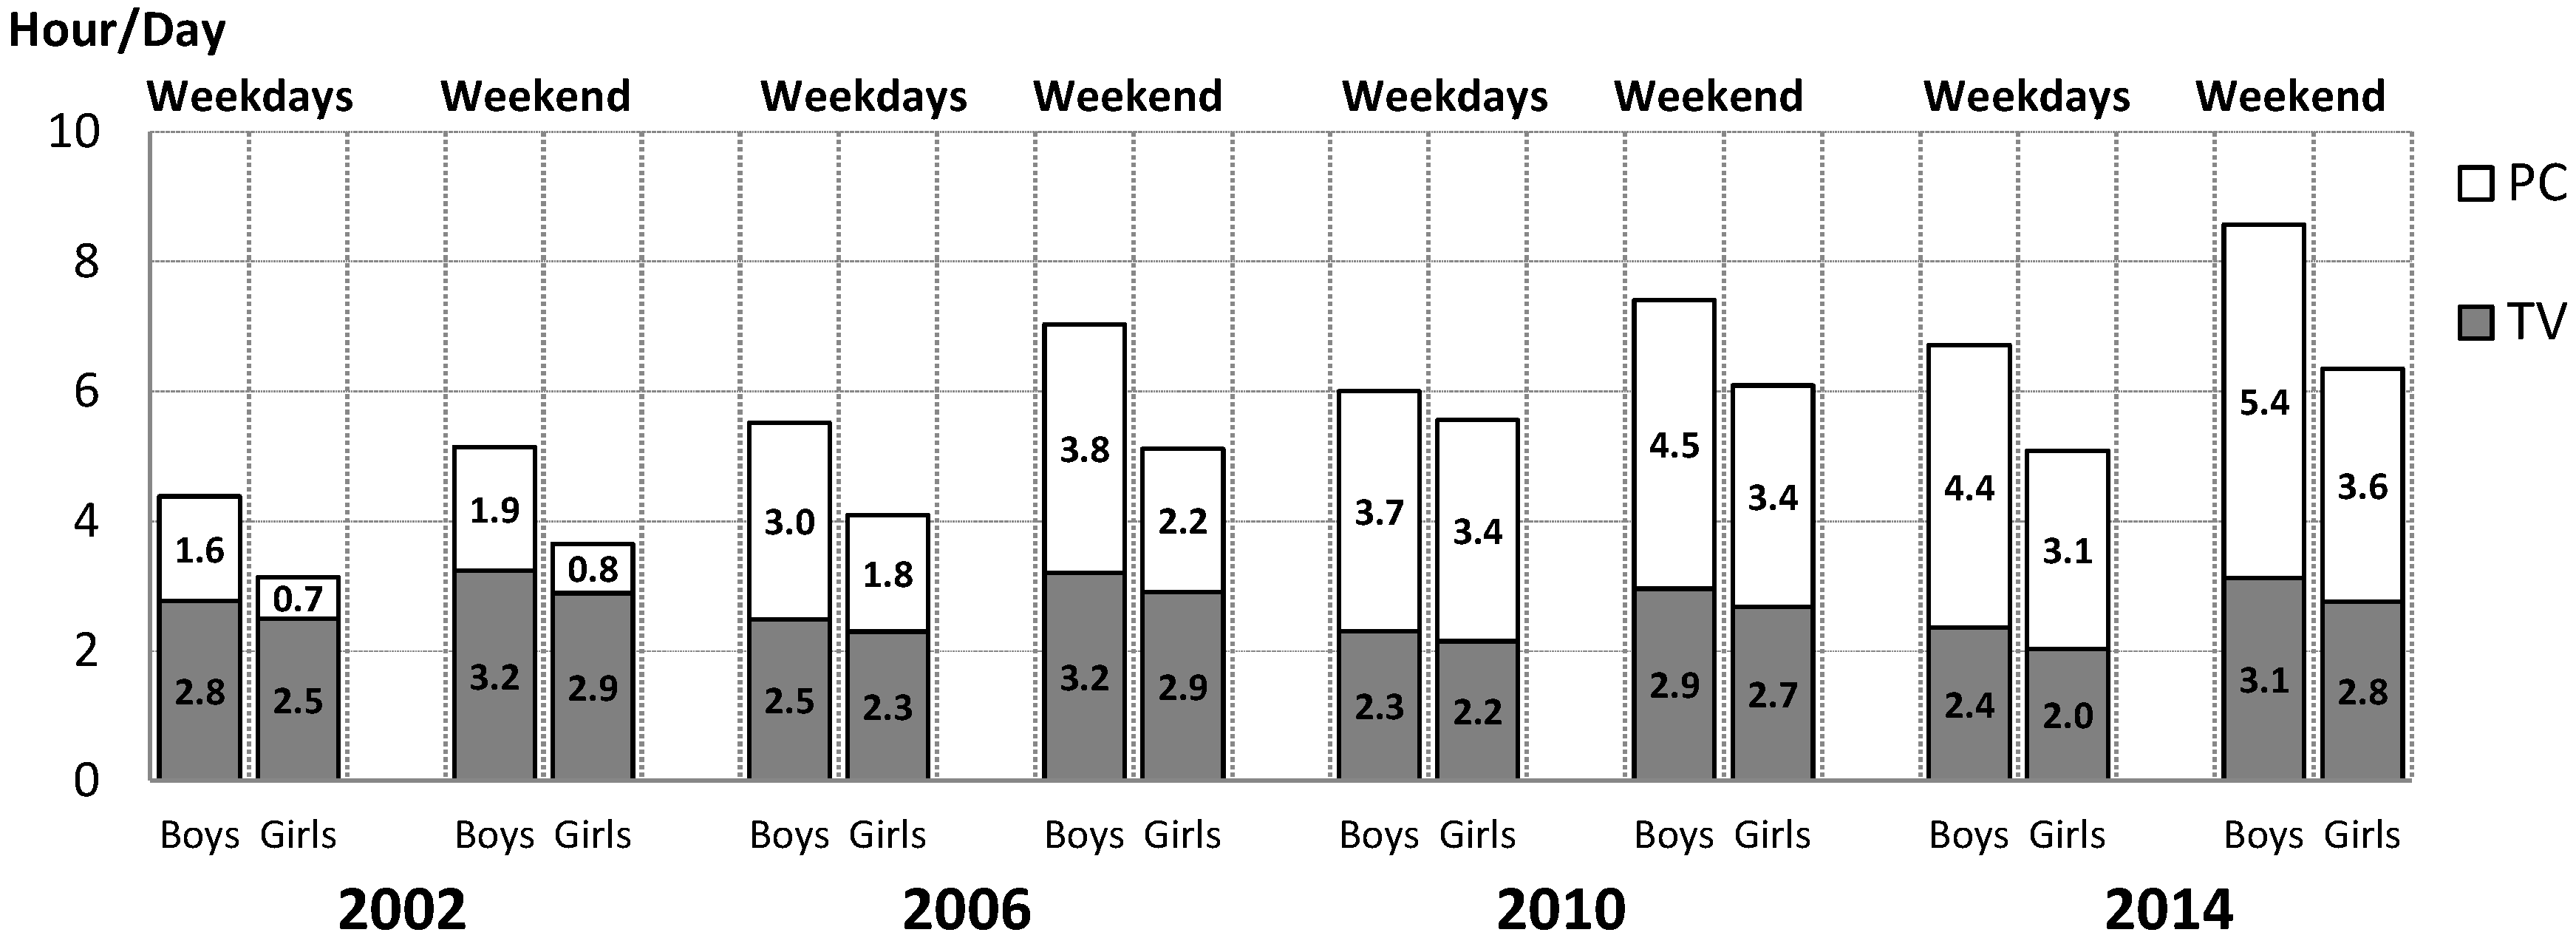 IJERPH | Free Full-Text | Temporal Trends in Overweight and Obesity,  Physical Activity and Screen Time among Czech Adolescents from 2002 to  2014: A National Health Behaviour in School-Aged Children Study